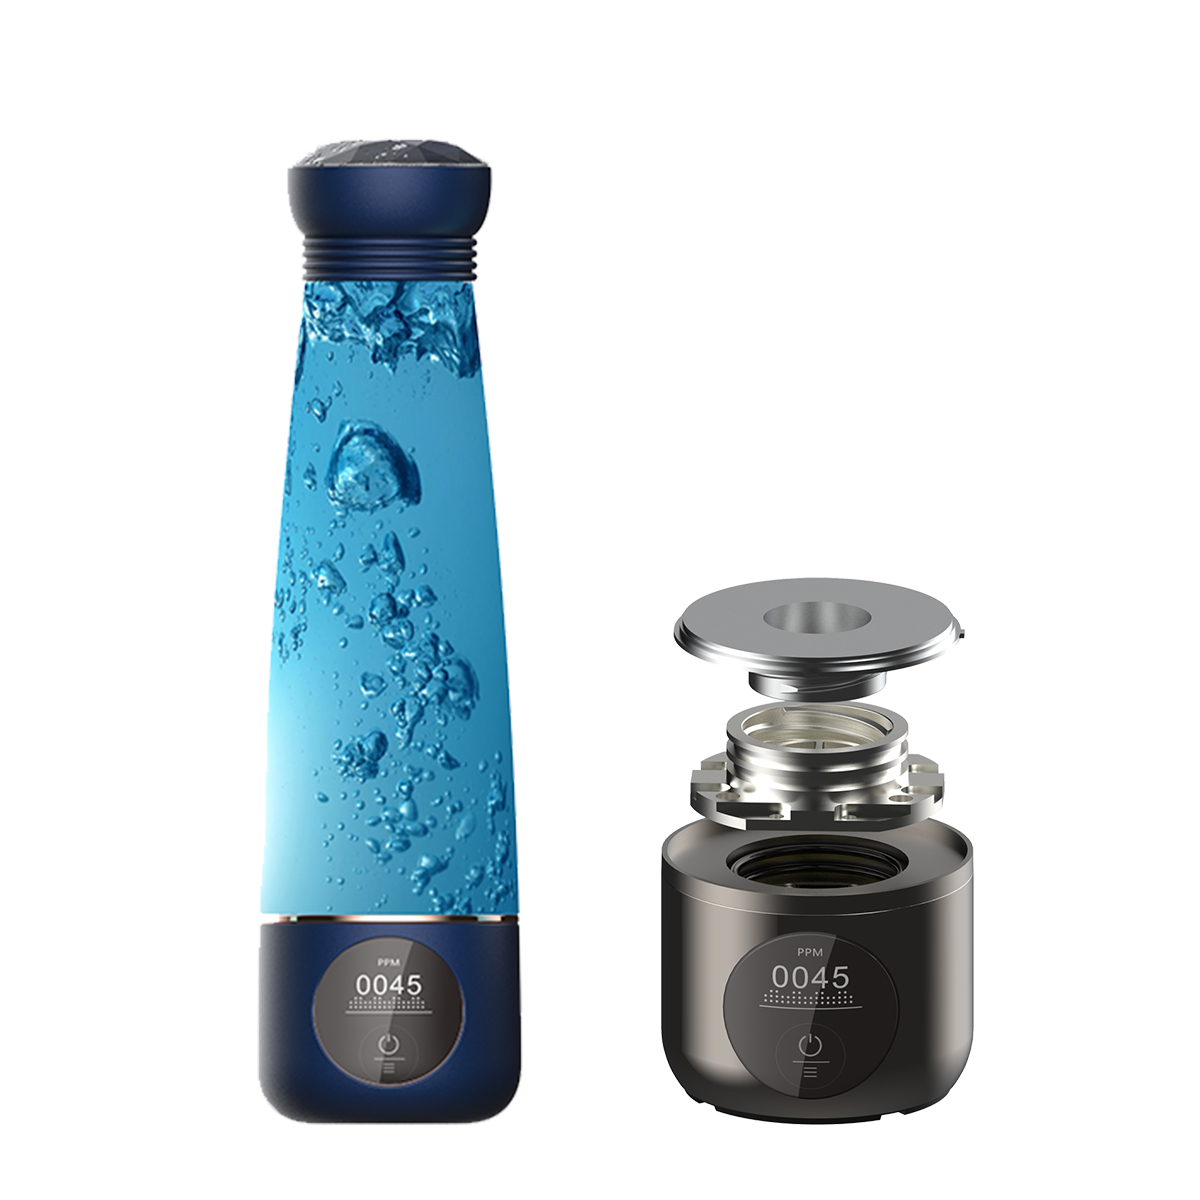 Olansi new portable hydrogen rich water bottle with hydrogen content over 3000ppb, contact me to learn more.